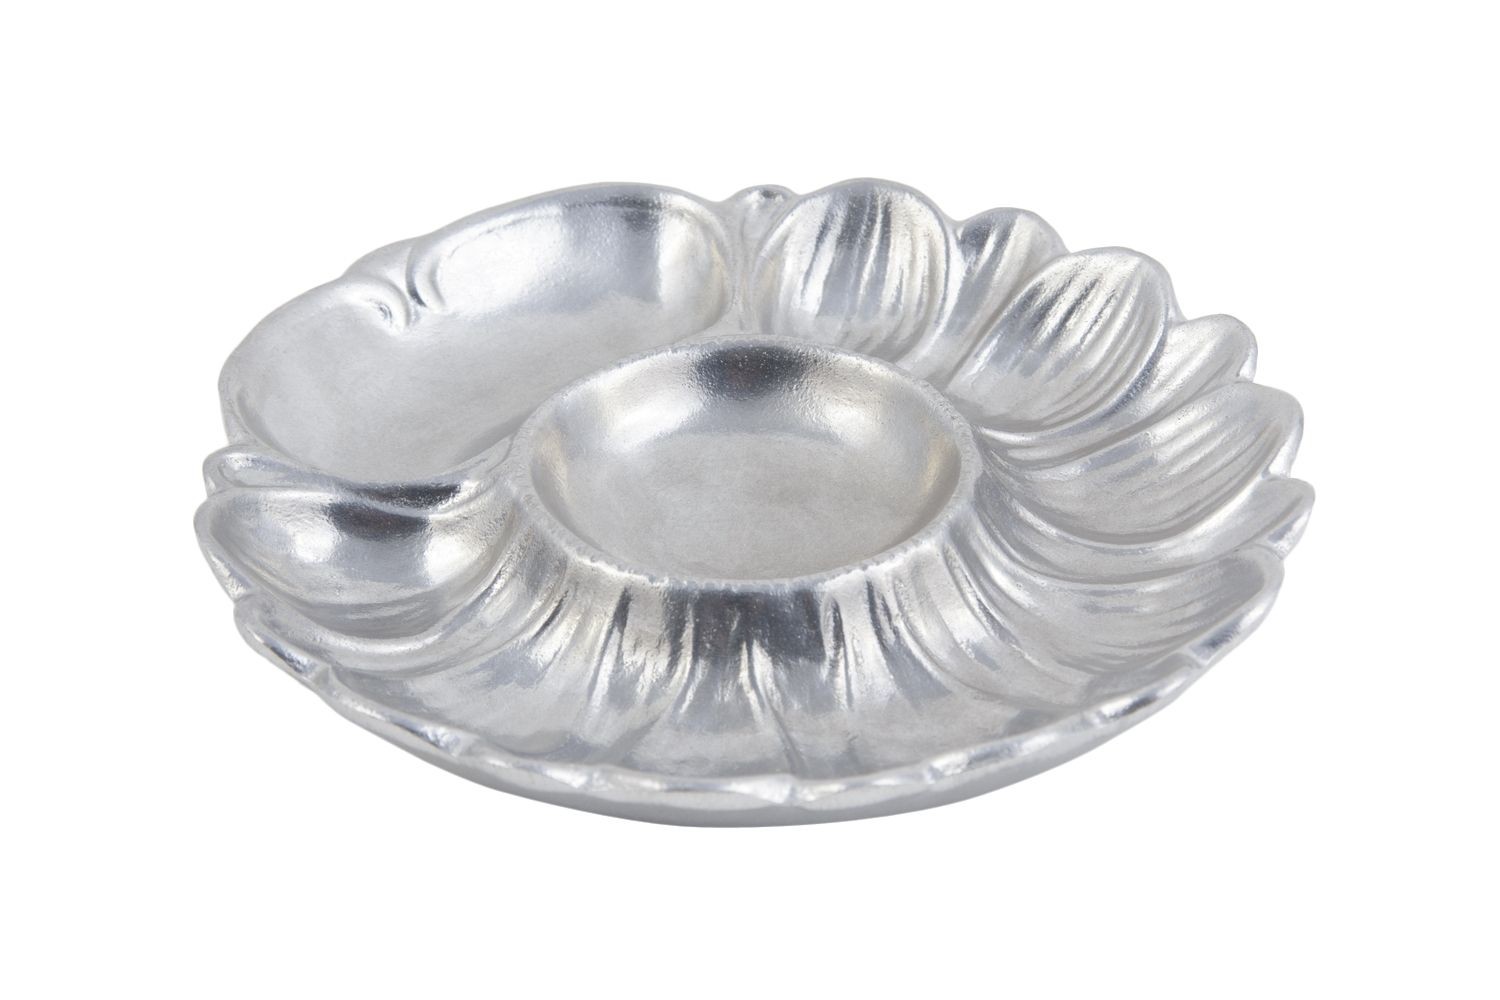 Bon Chef 5080P Seafood and Artichoke Plate, Pewter Glo 8 3/4" Dia., Set of 6